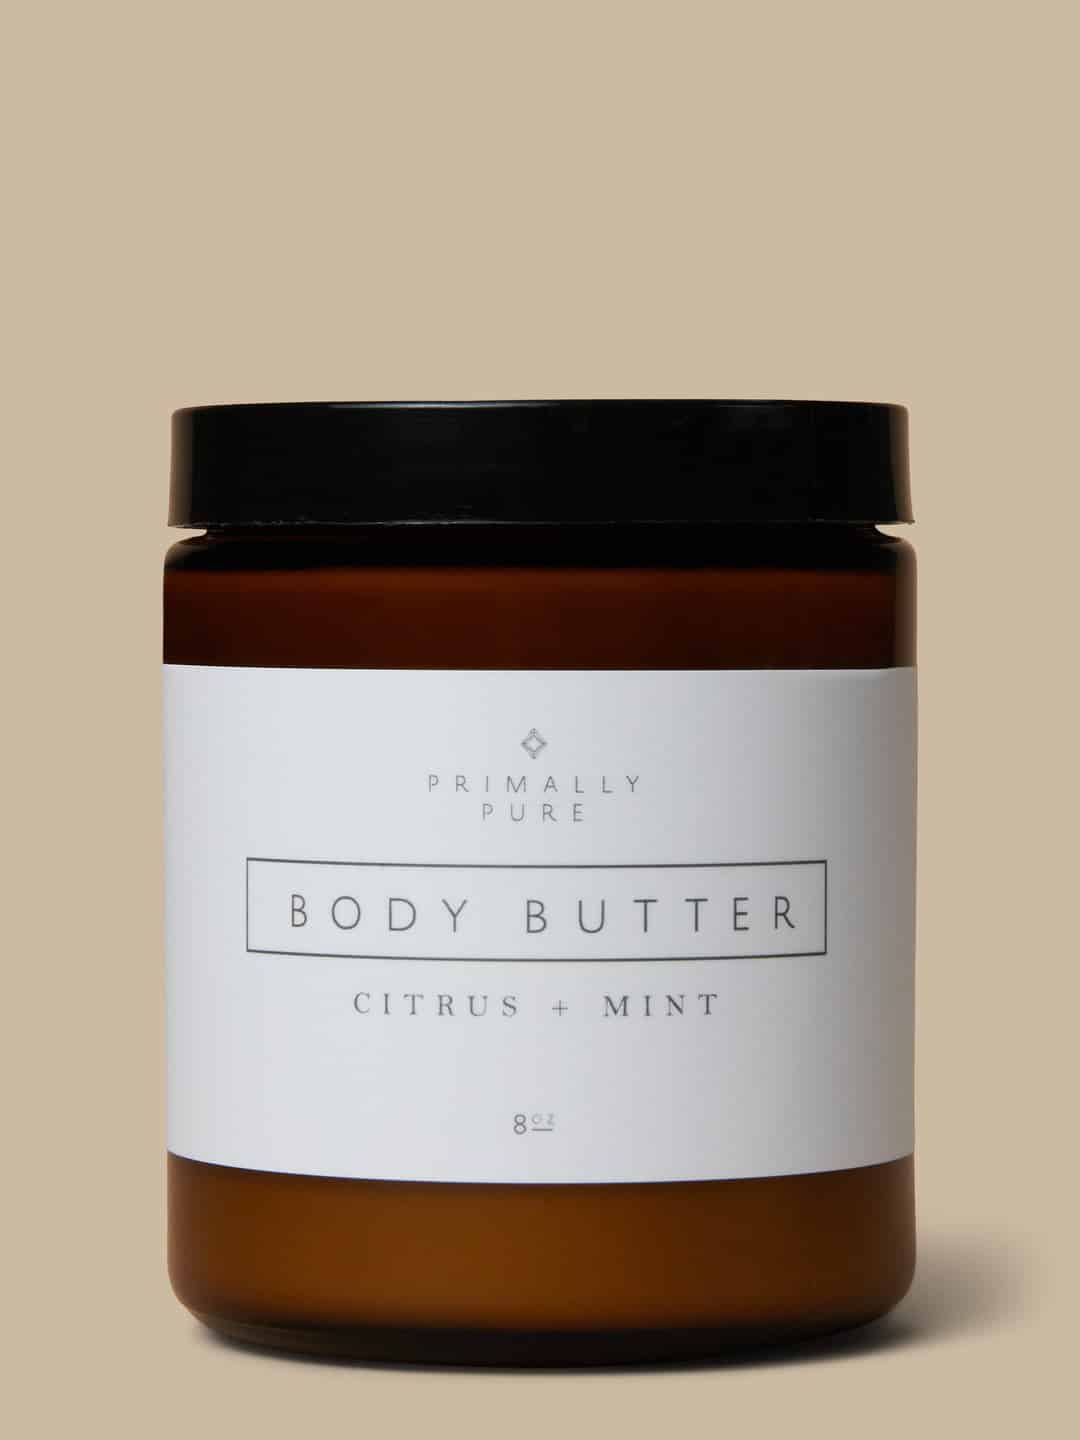 A glass jar of Primally Pure body butter.